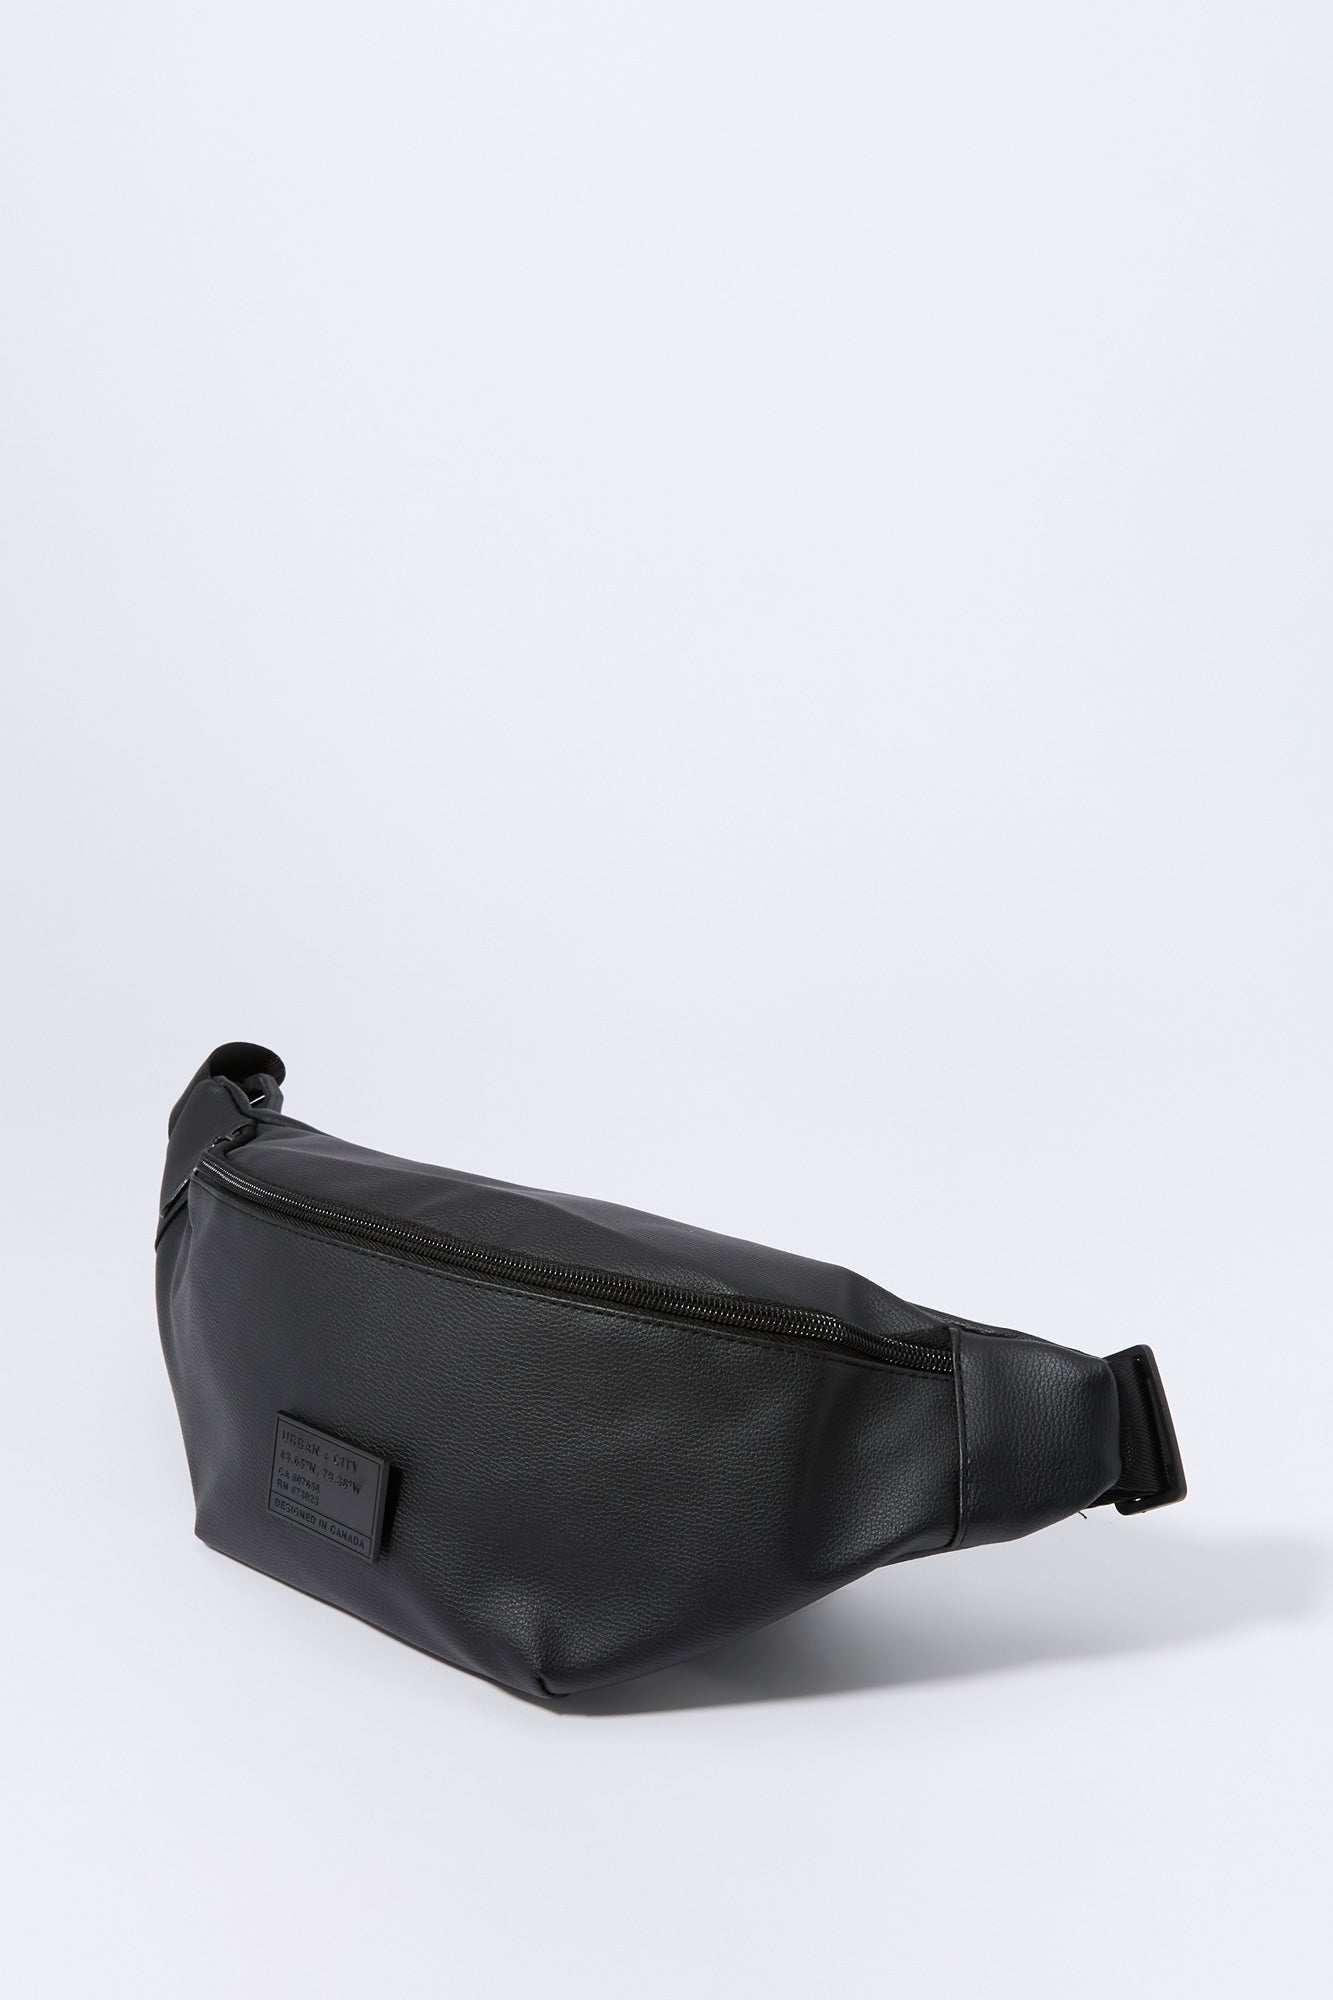 Faux Leather Fanny Pack